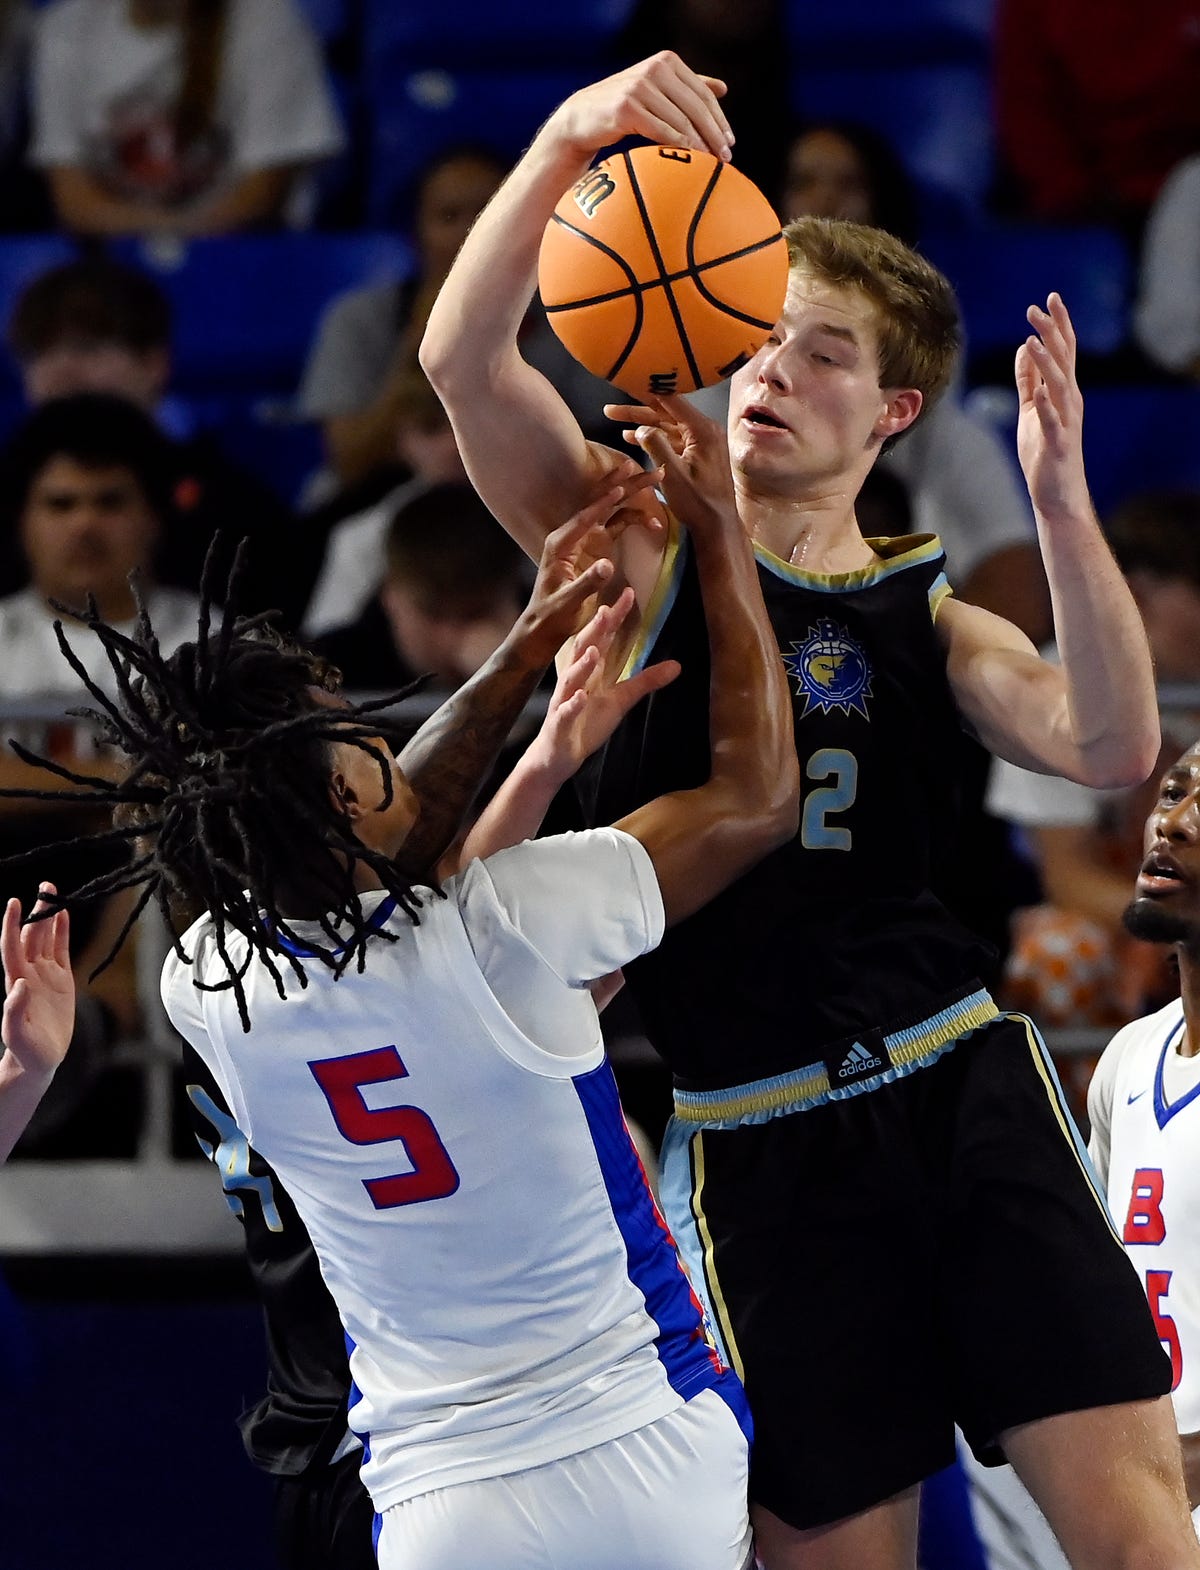 Cochran Brothers Shine as Brentwood’s Basketball Future in Surprise TSSAA Tournament Quarterfinals Clash